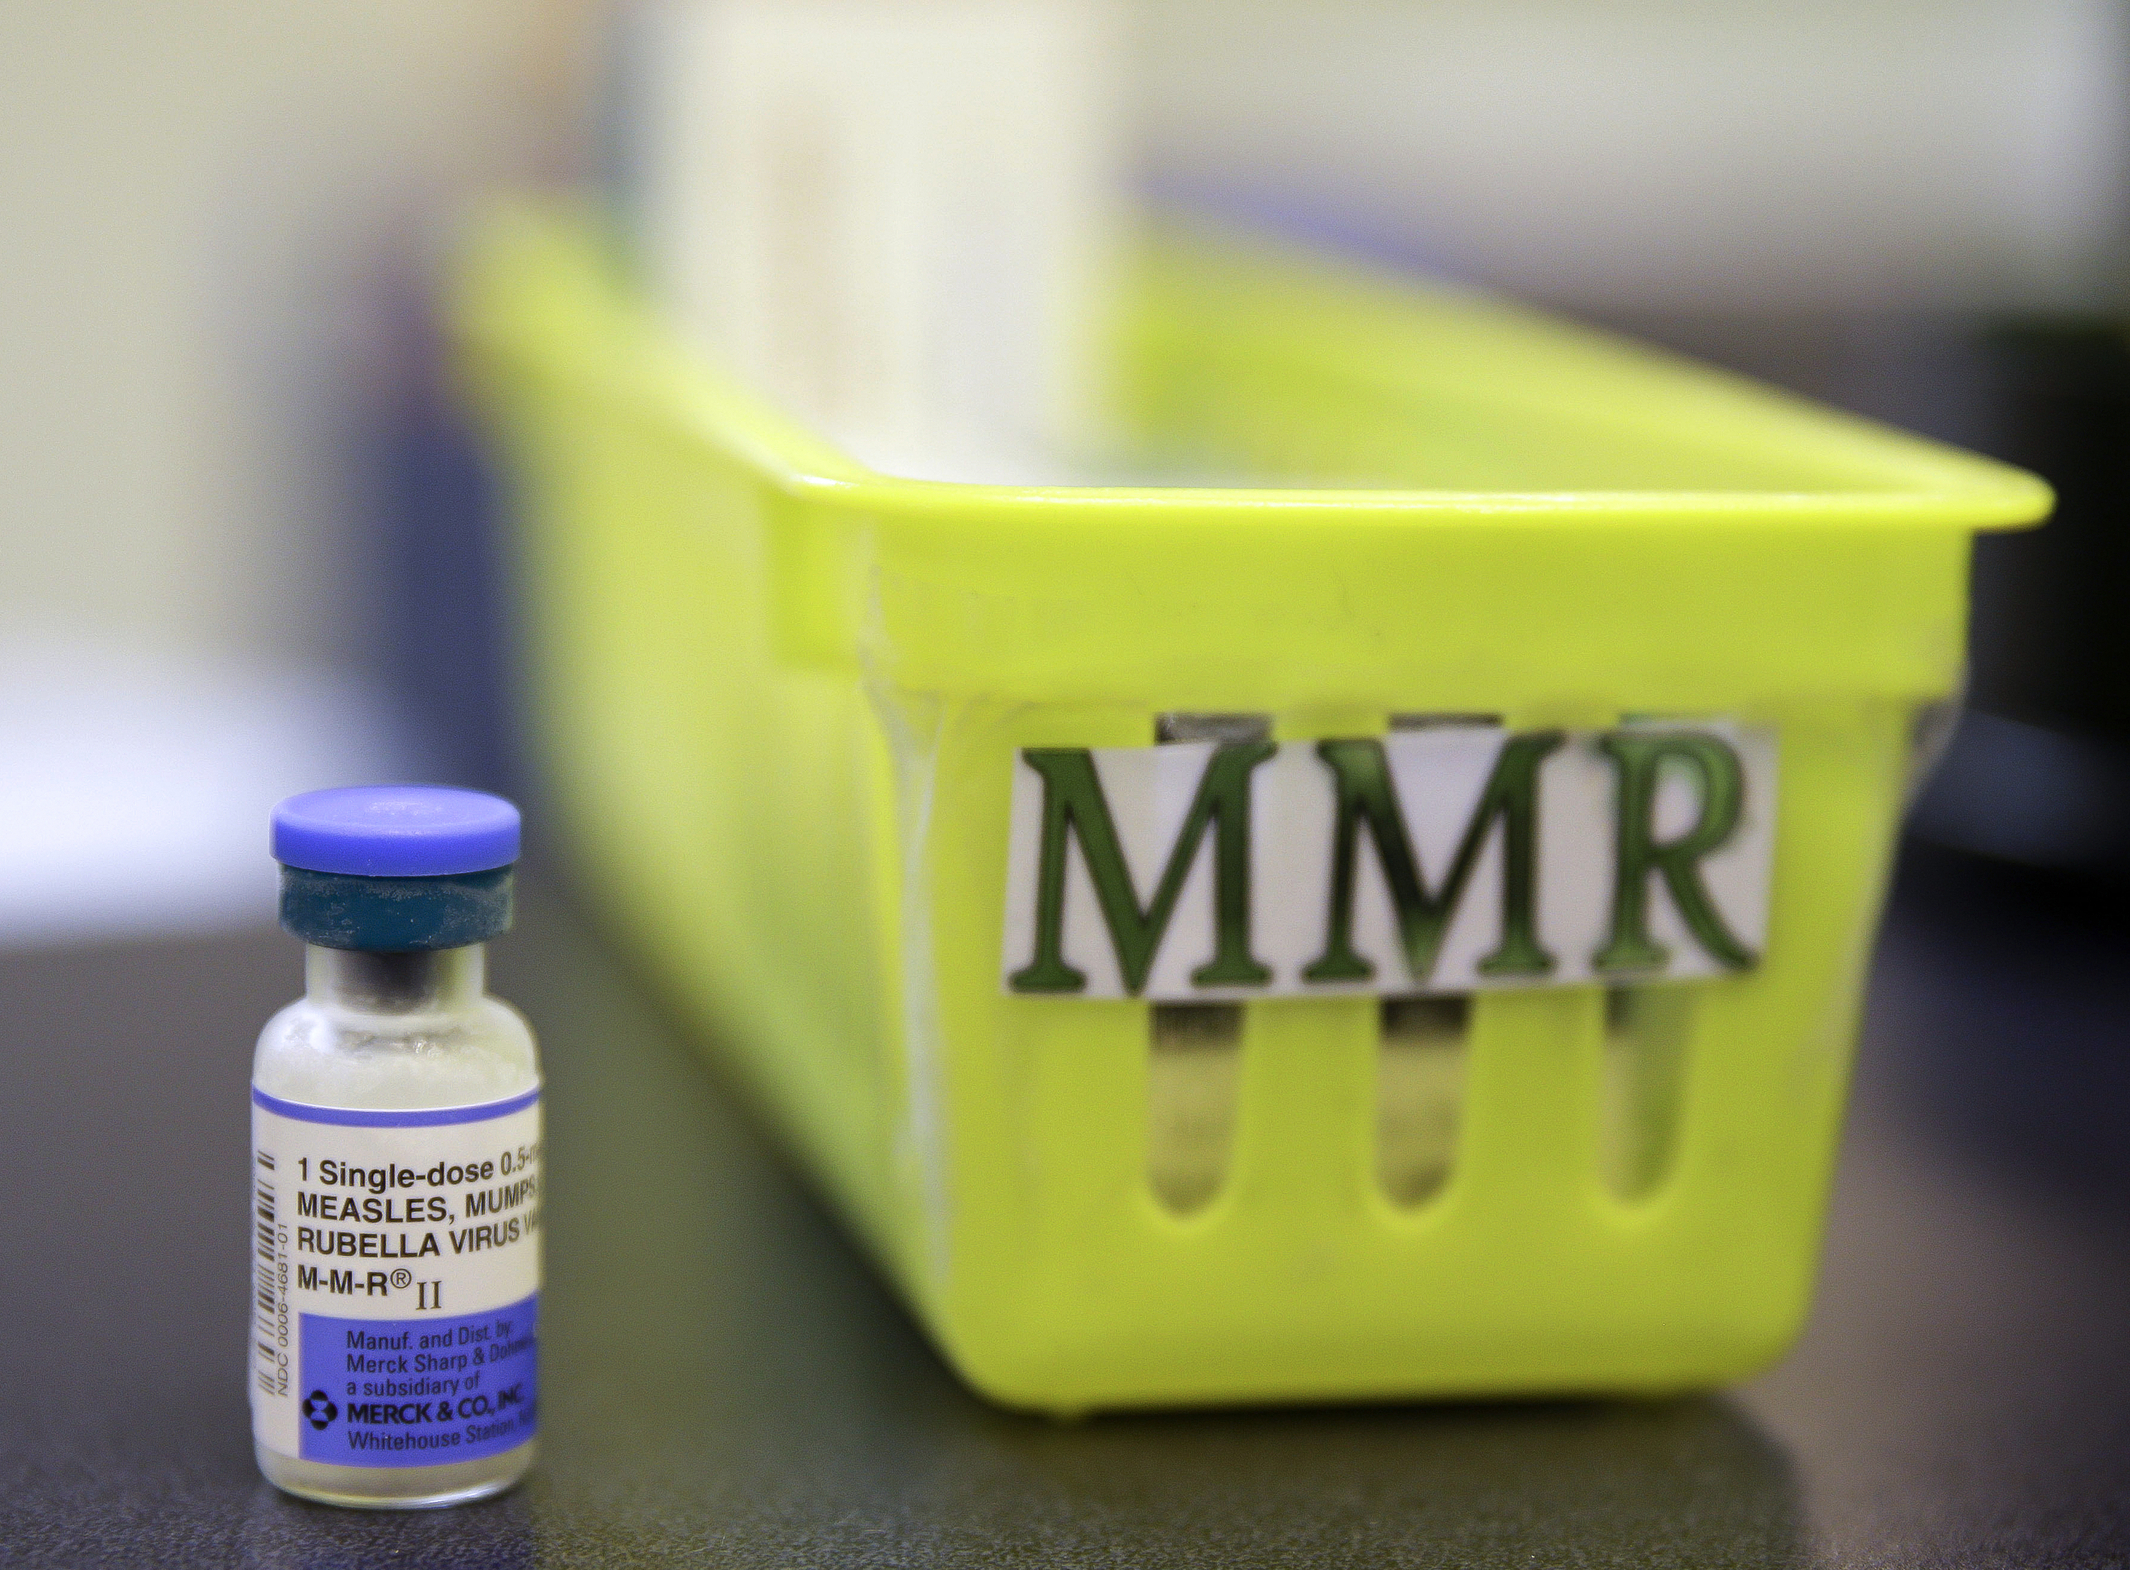 Measles case confirmed in Washtenaw County, health officials caution about exposure location